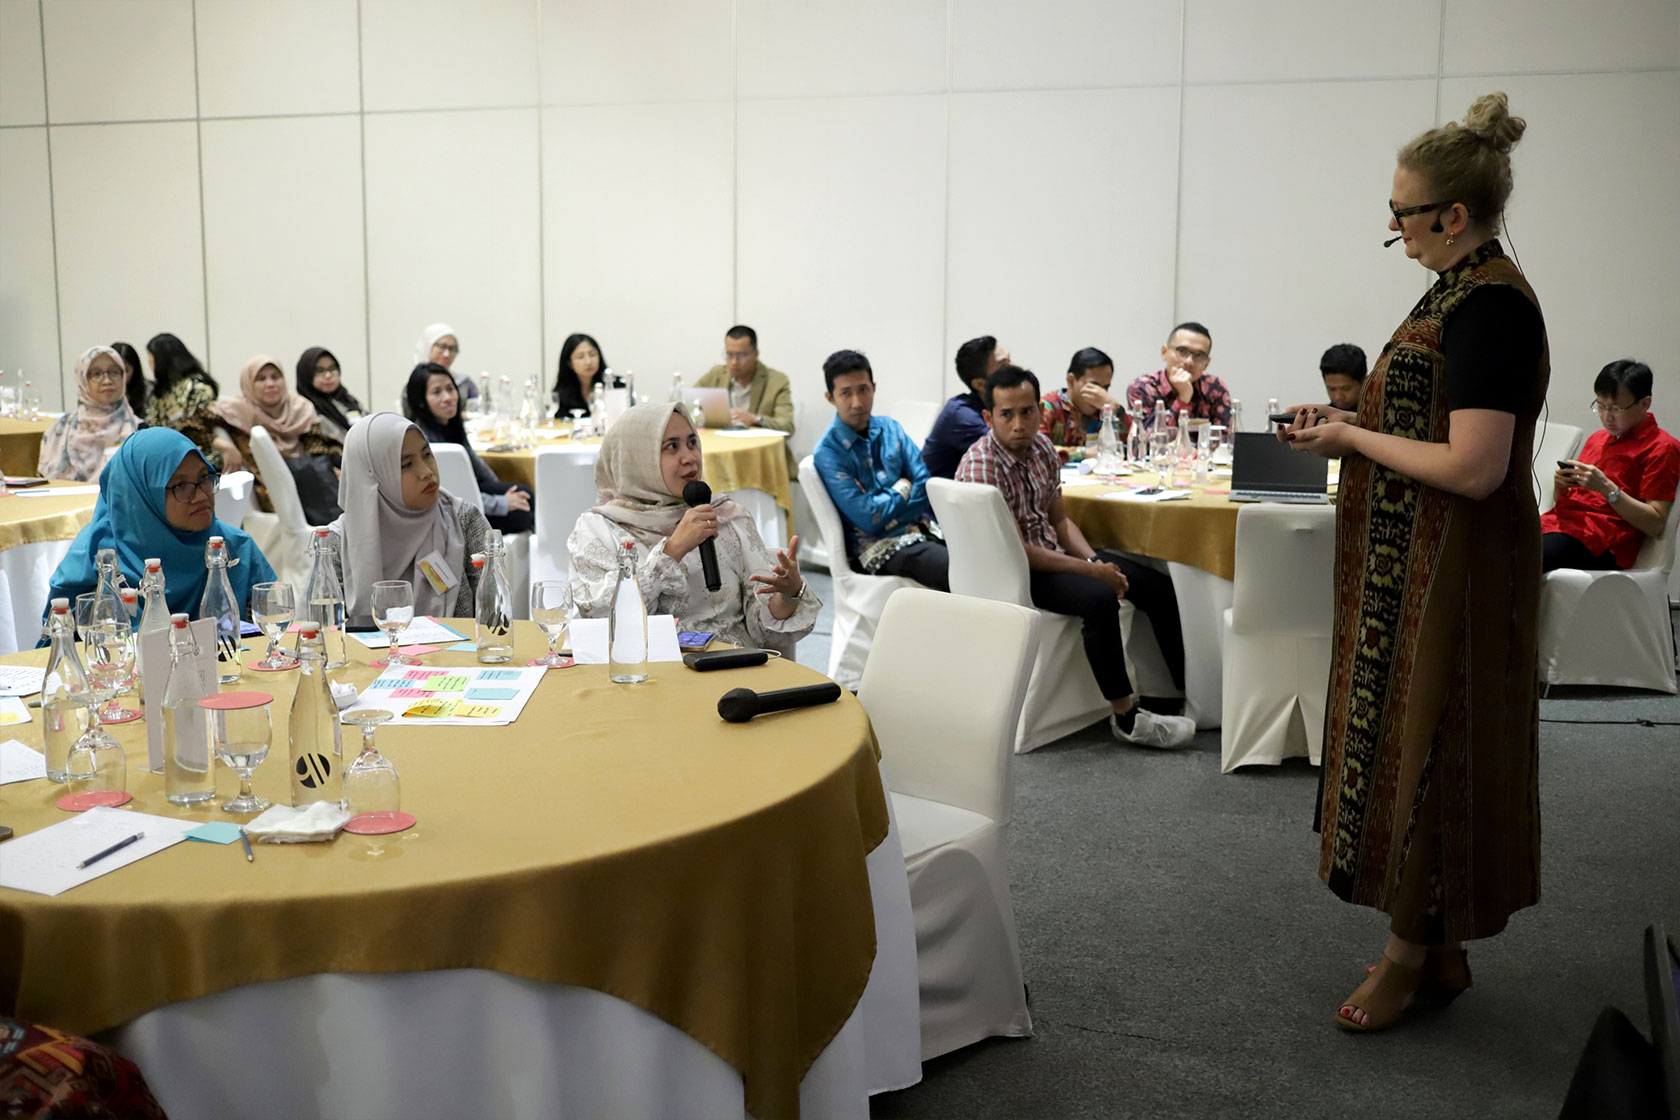 Amanda Schillers from Australia Awards in Indonesia is actively involved with the workshop participants.